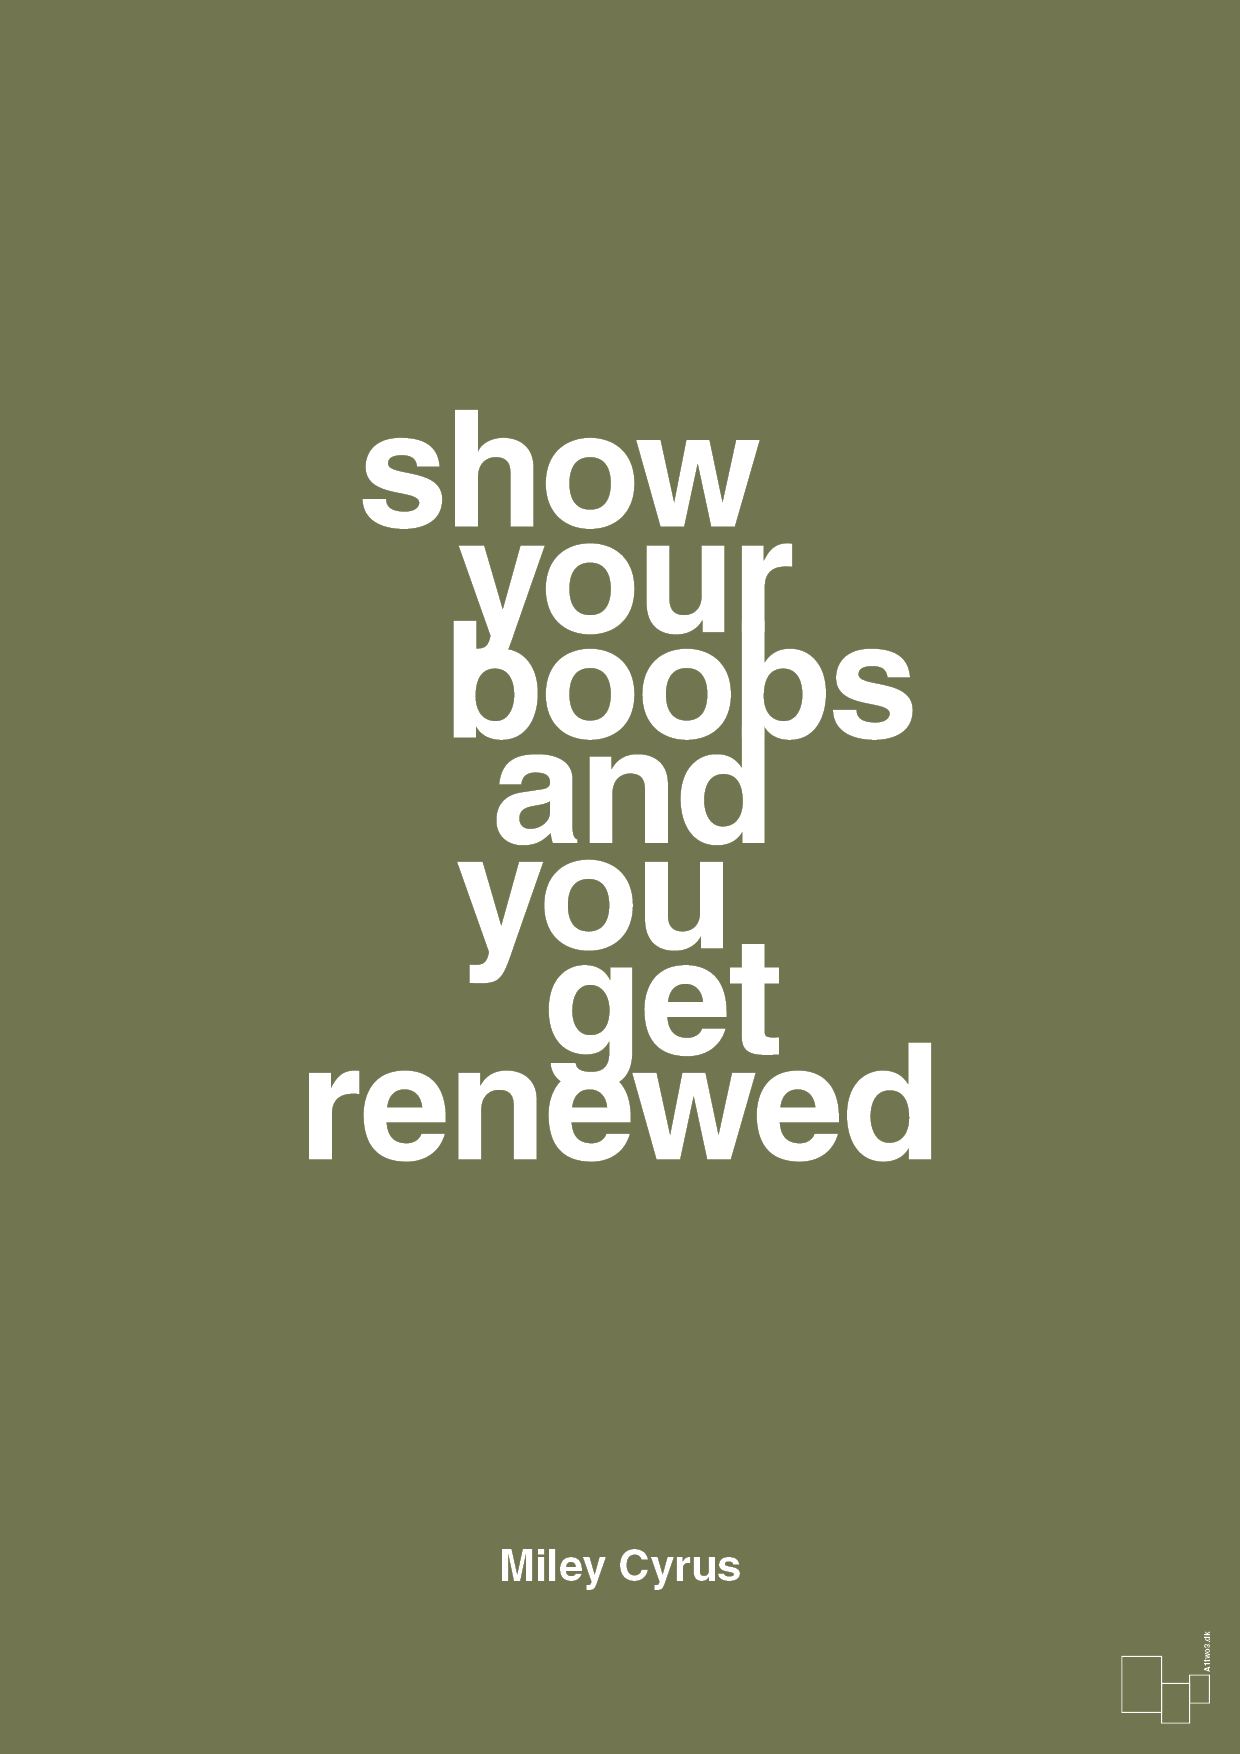 show your boobs and you get renewed - Plakat med Citater i Secret Meadow